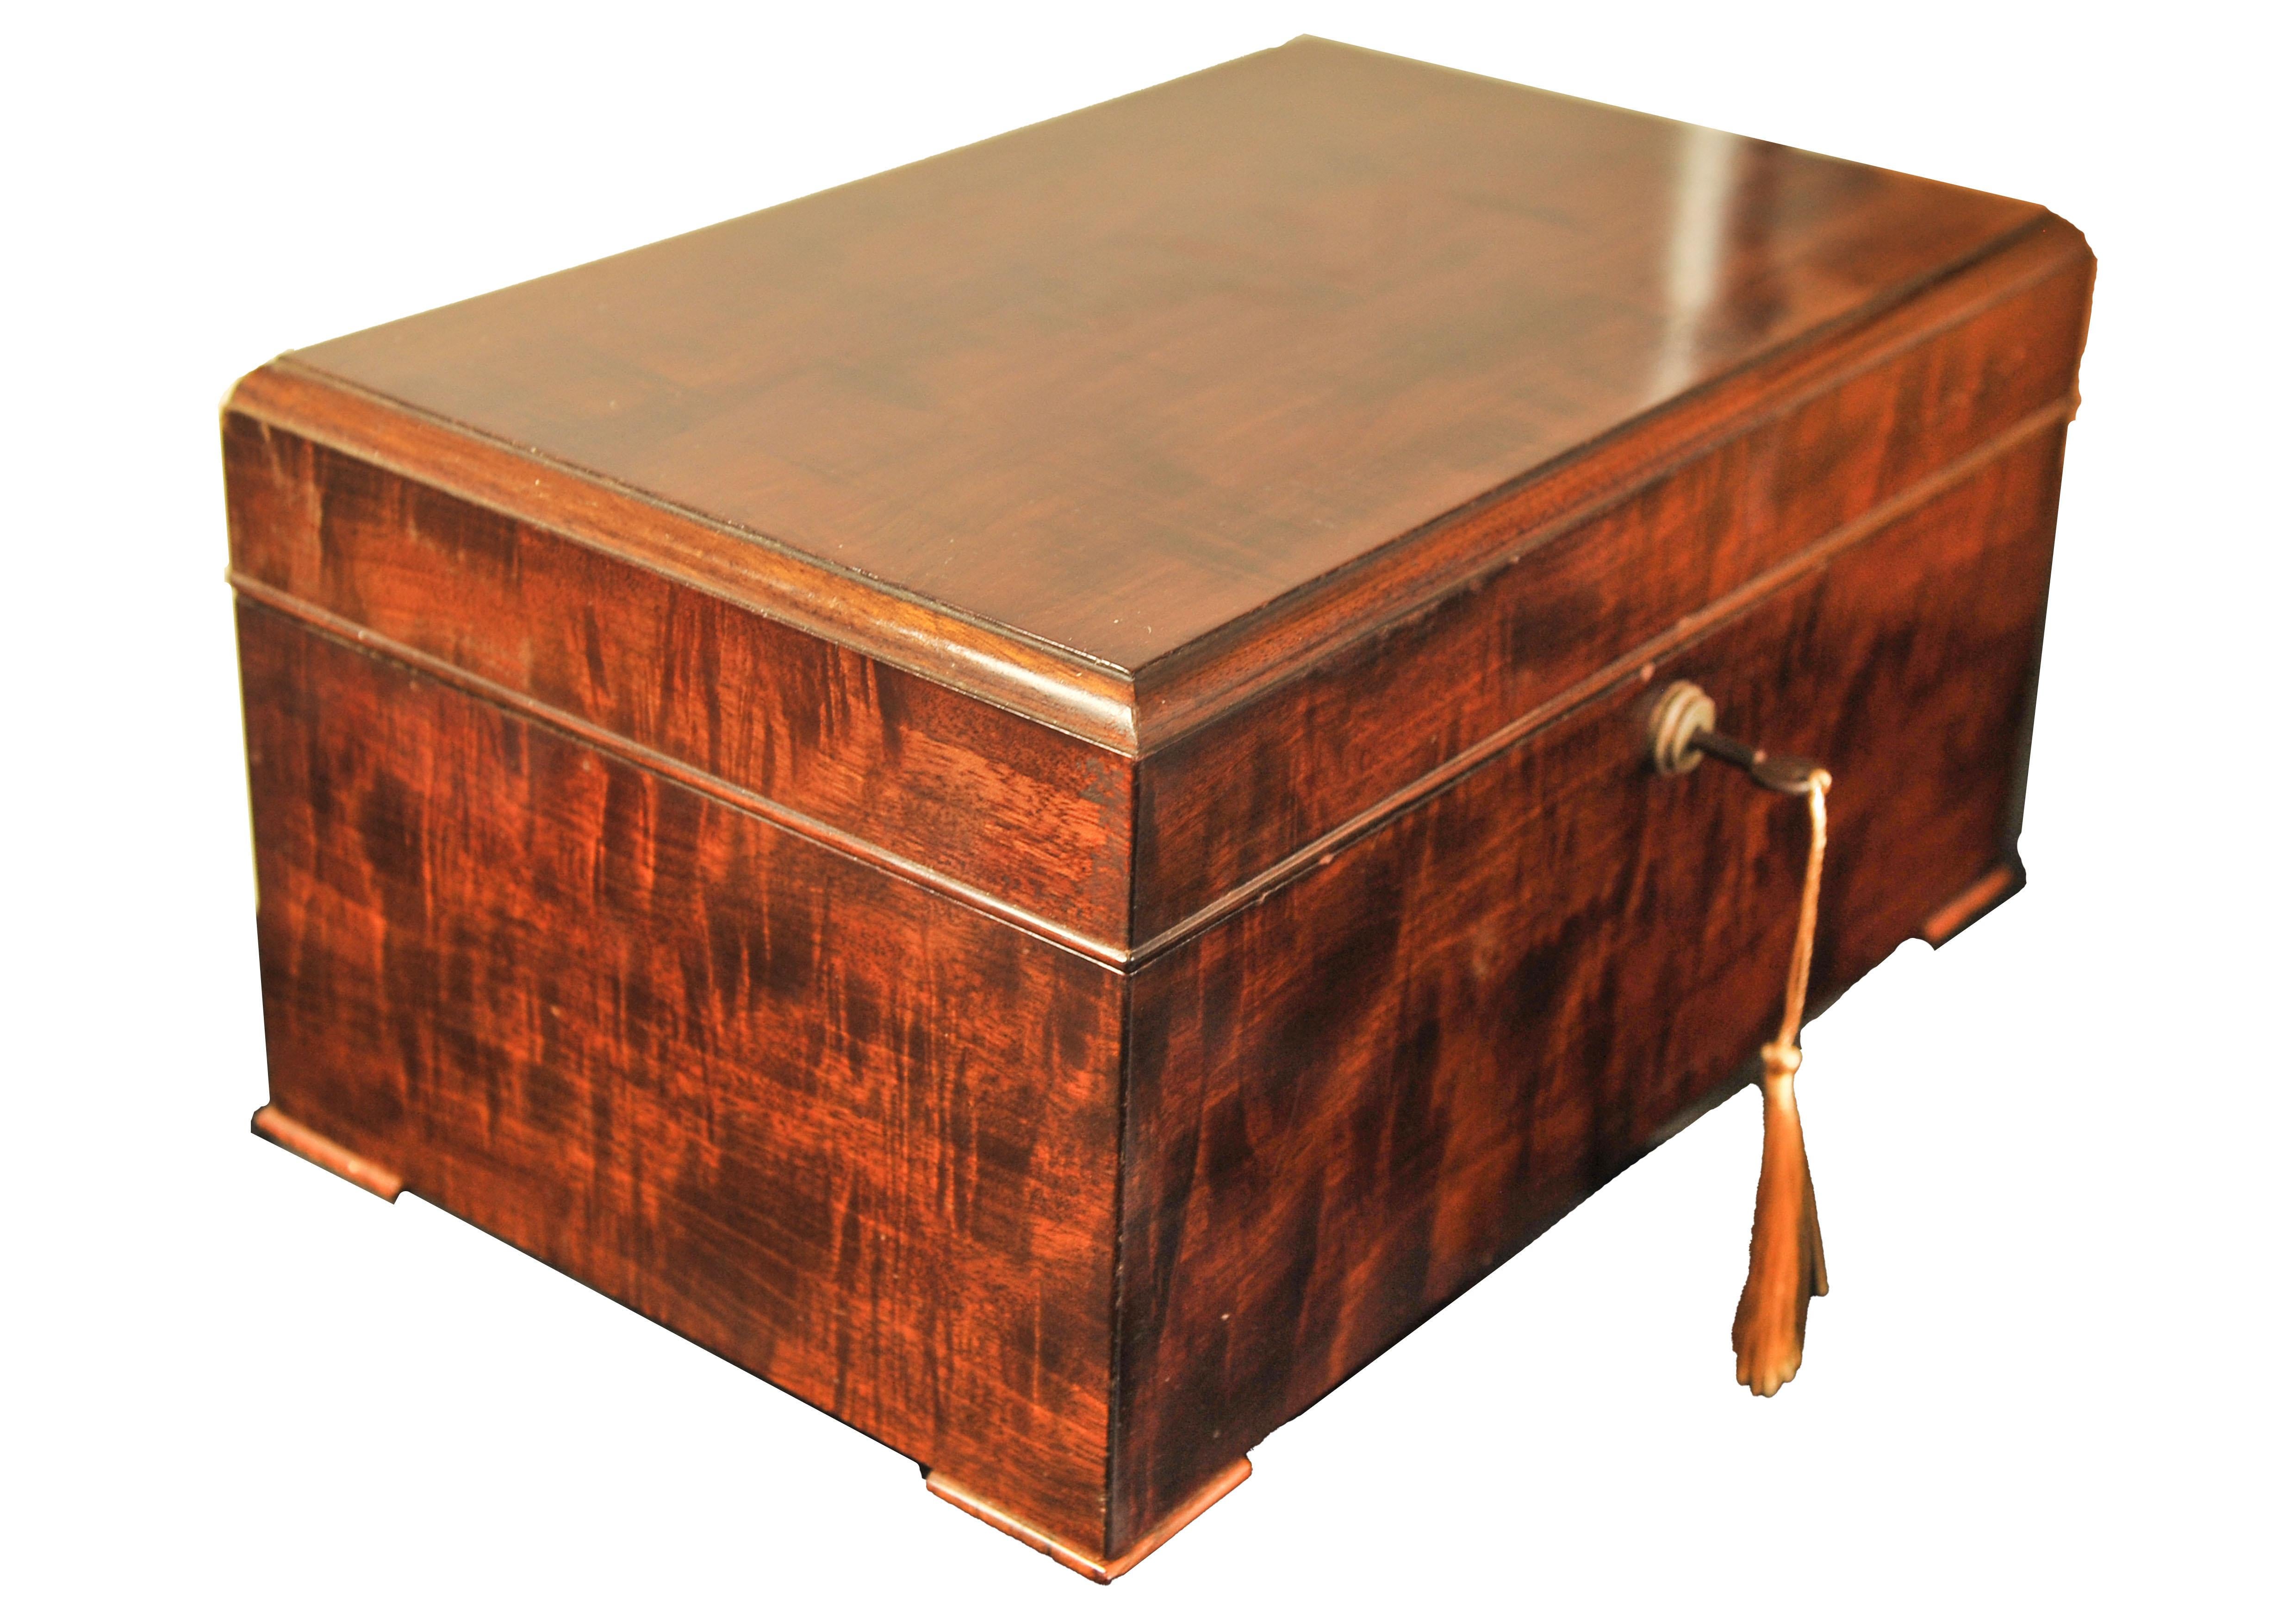 A Beautiful Hand-Crafted Victorian 19th Century Mahogany, Veneered Cigar Humidor Box Manufactured by HL Savory & Co. Ltd. of 178 New Bond Street, London. (Very renowned shopping address in London)

Handmade humidor box has a chamfered edge top with